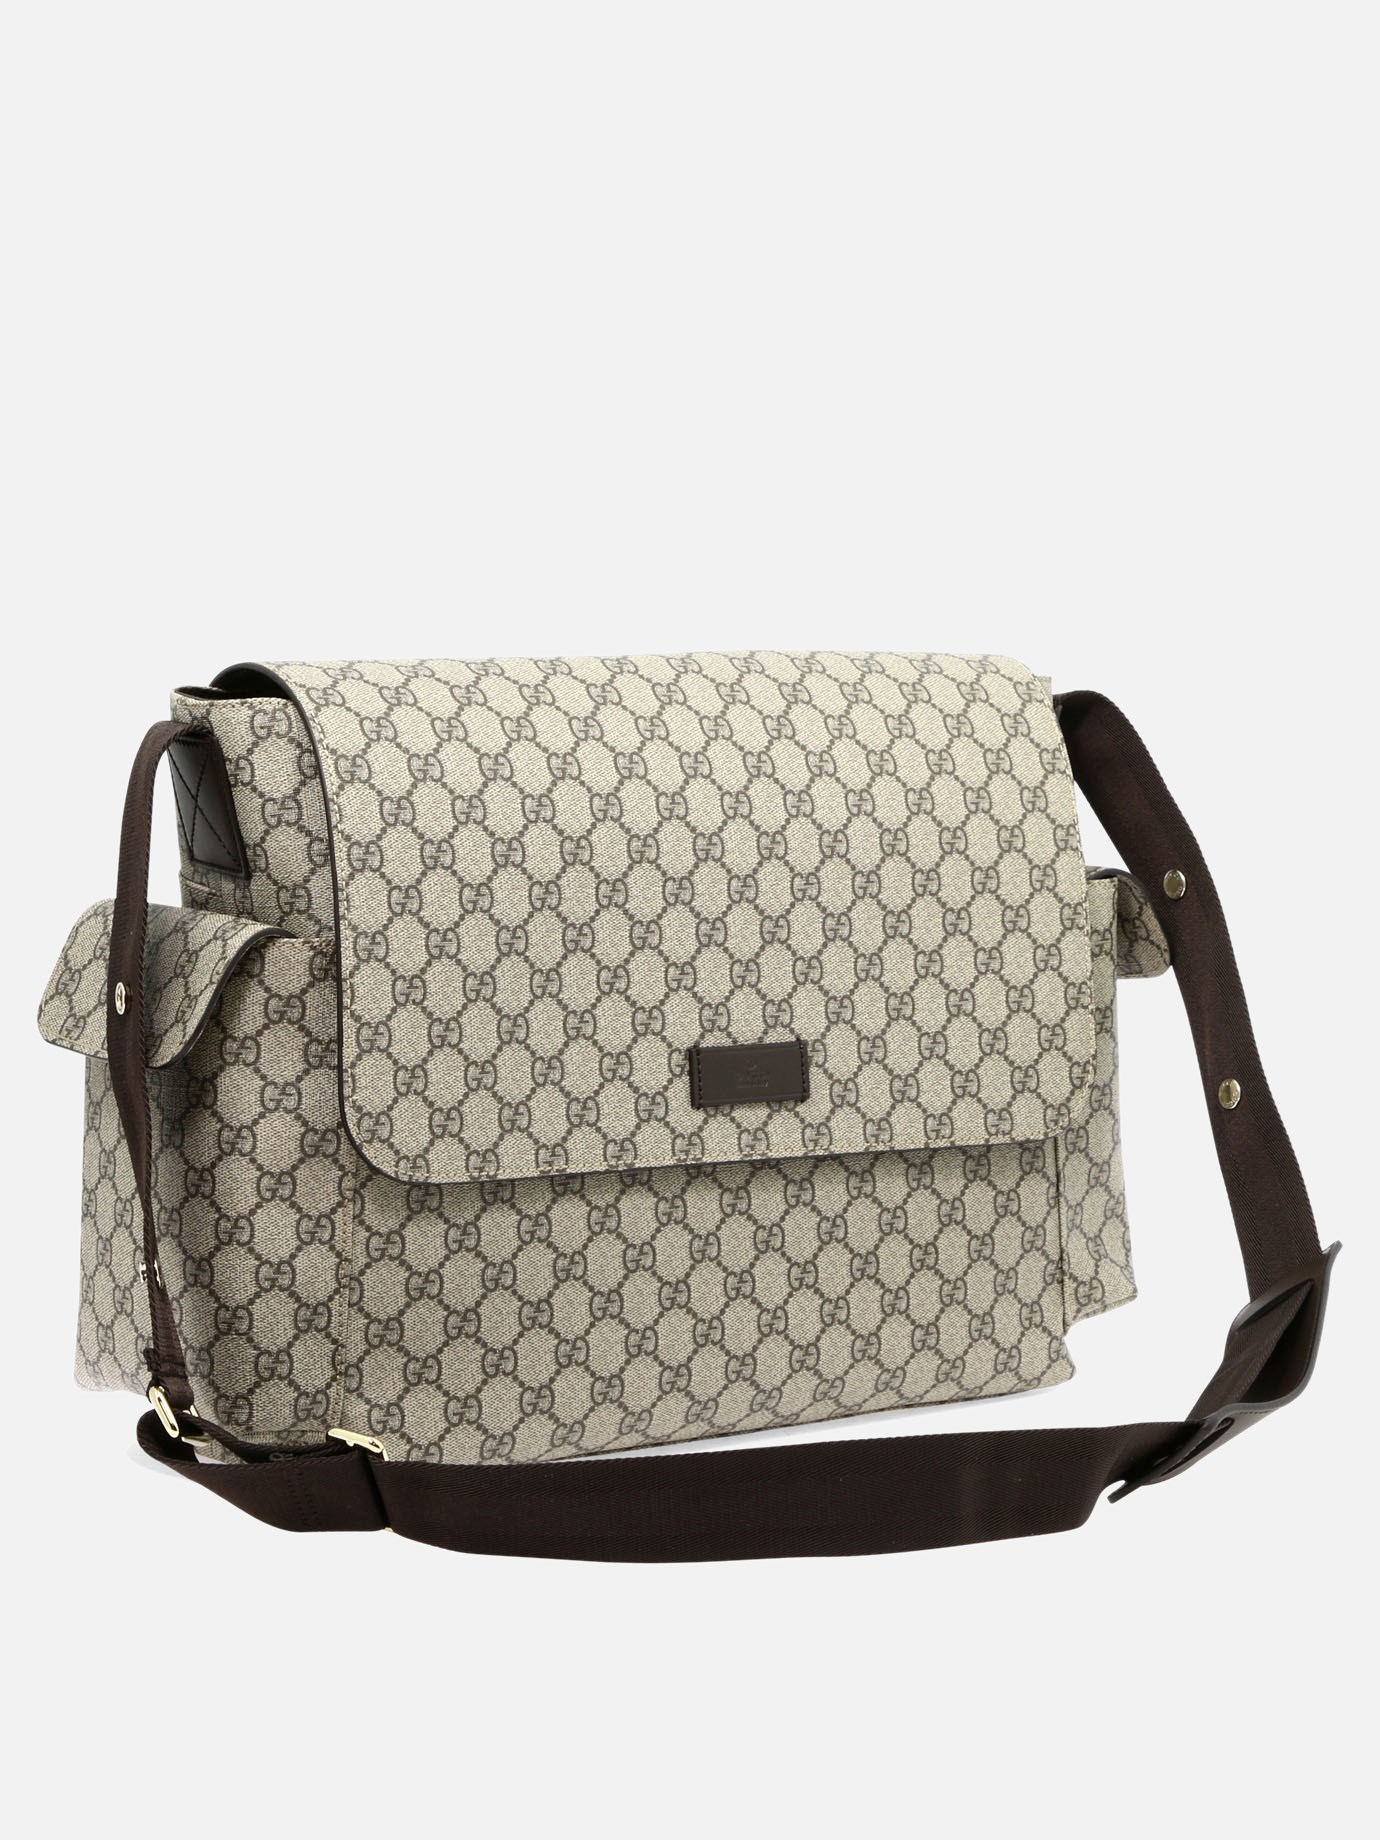  GG Supreme  baby changing bag by Gucci Kids